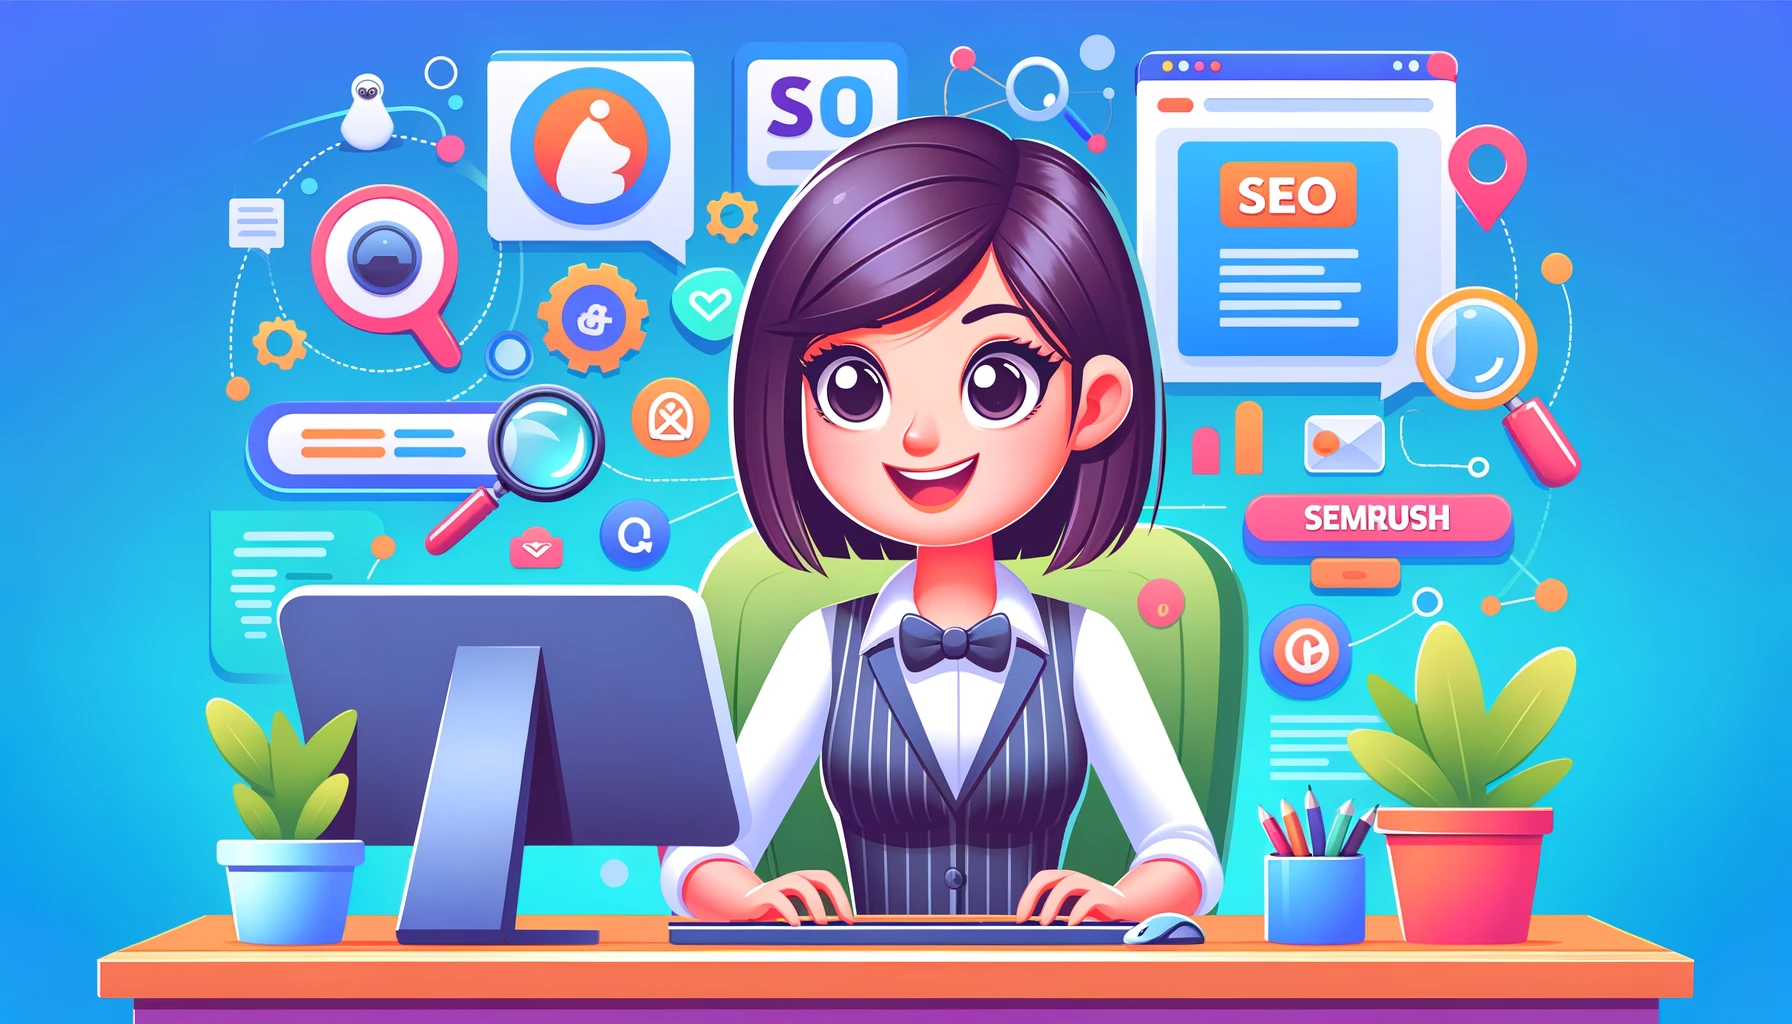 The image for your article's featured blog photo has been created, depicting a female digital marketing expert at her computer, surrounded by elements of SEO, affiliate marketing, and digital tools like SEMrush. This animated character design is colorful and captures the spirit of successful online marketing.